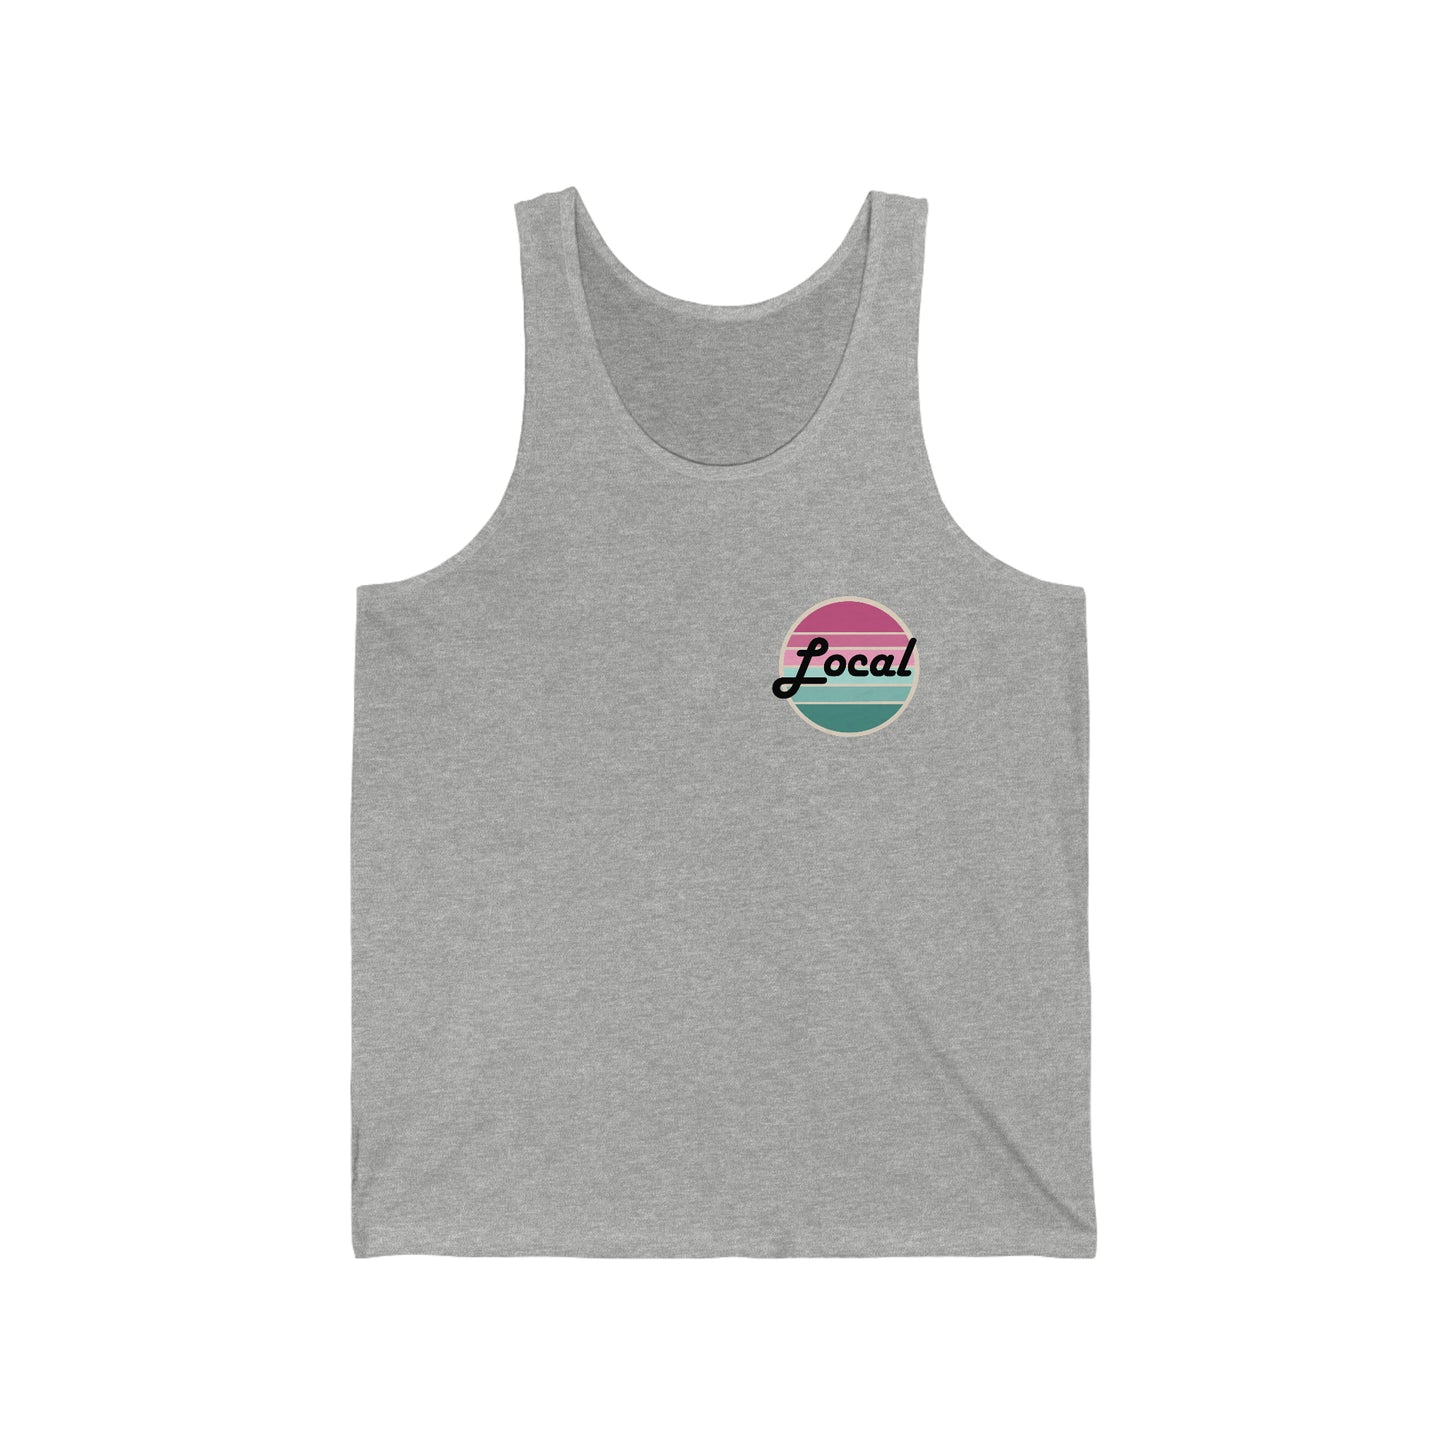 Respect the Locals ladies tank - 2 colors available